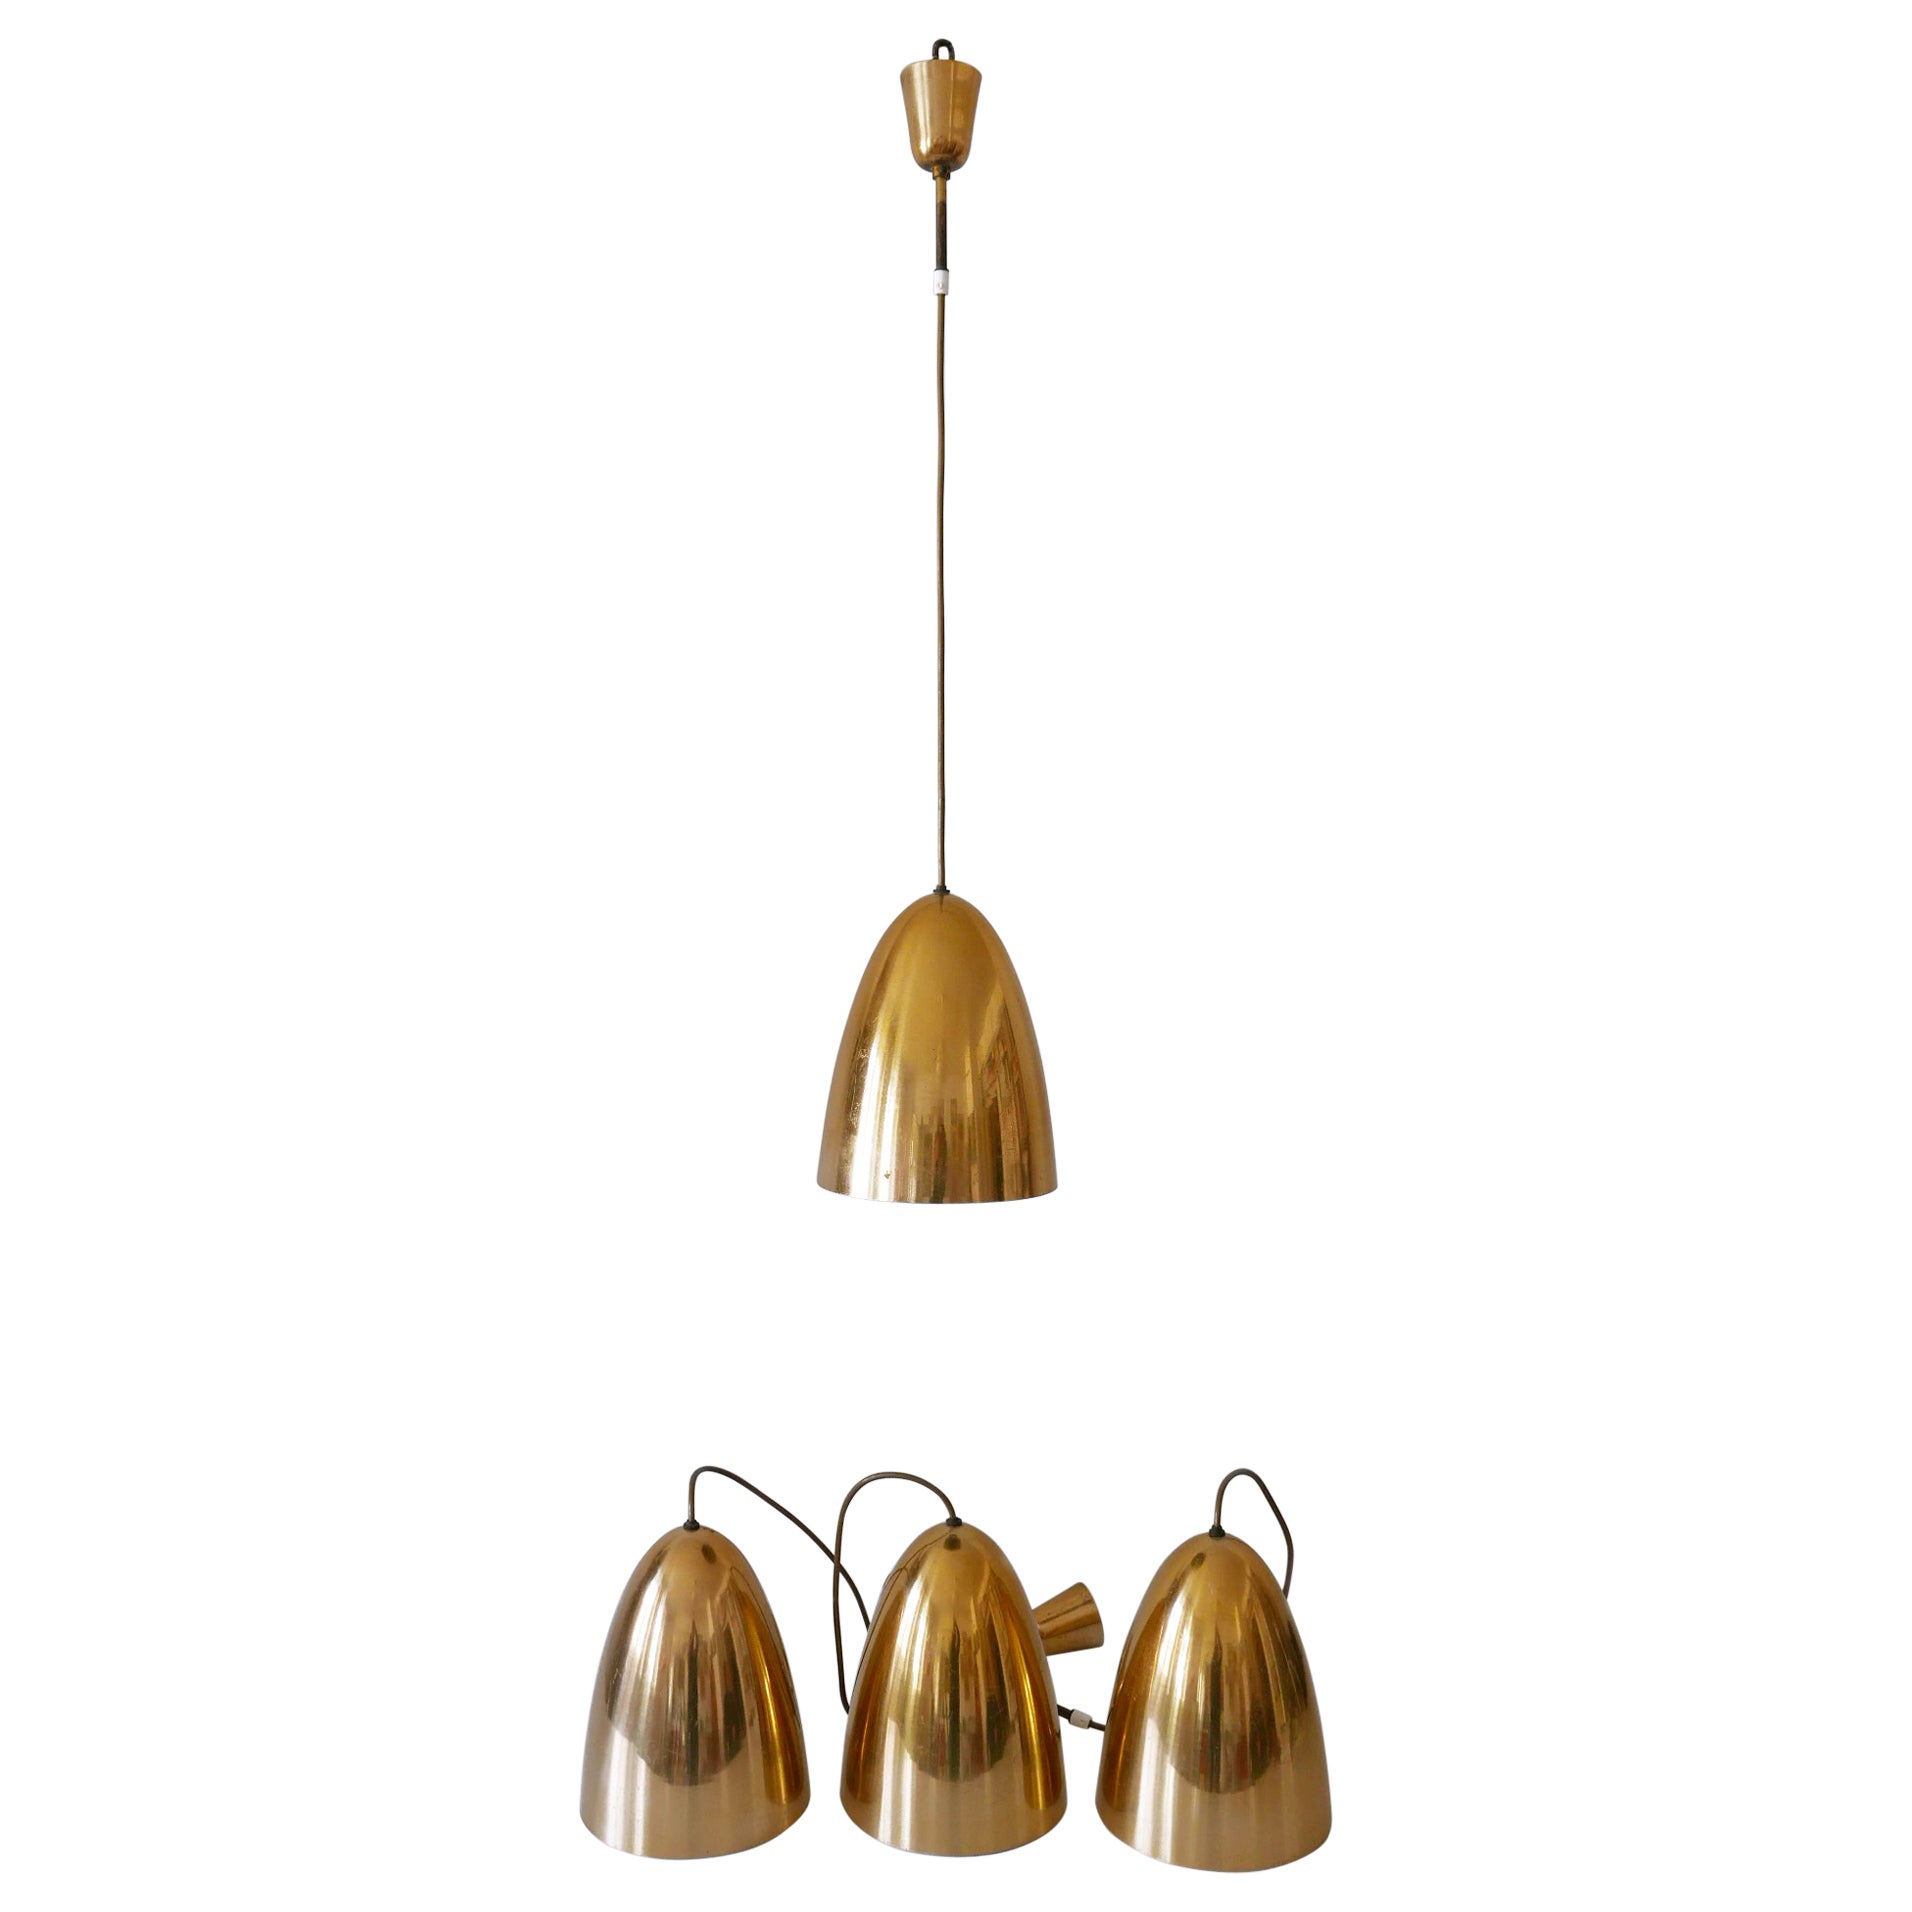 1 of 4 Elegant Mid Century Modern Pendant Lamps or Hanging Lights Germany 1950s For Sale